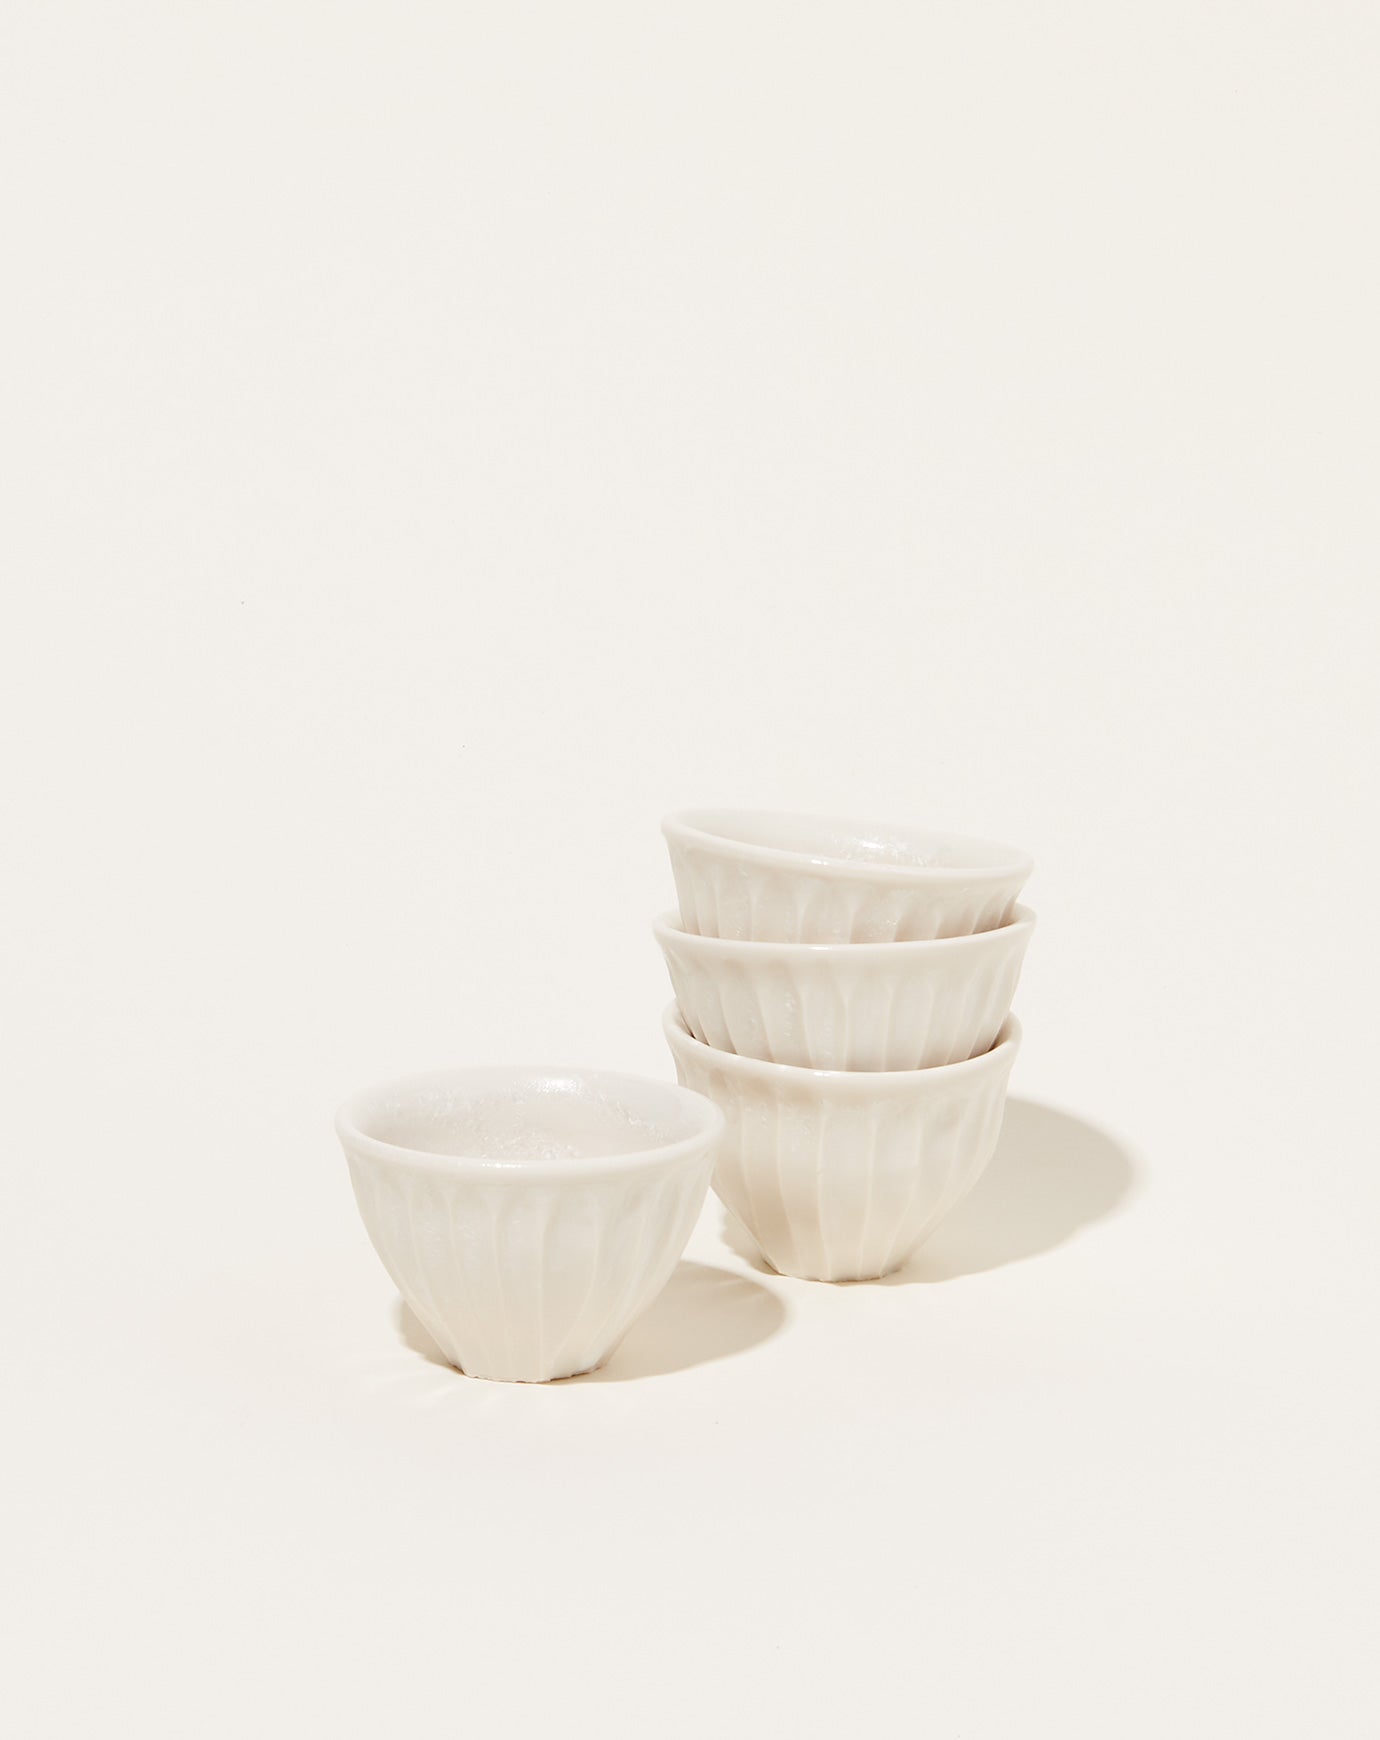 Monohanako Fluted Sake Cup in White